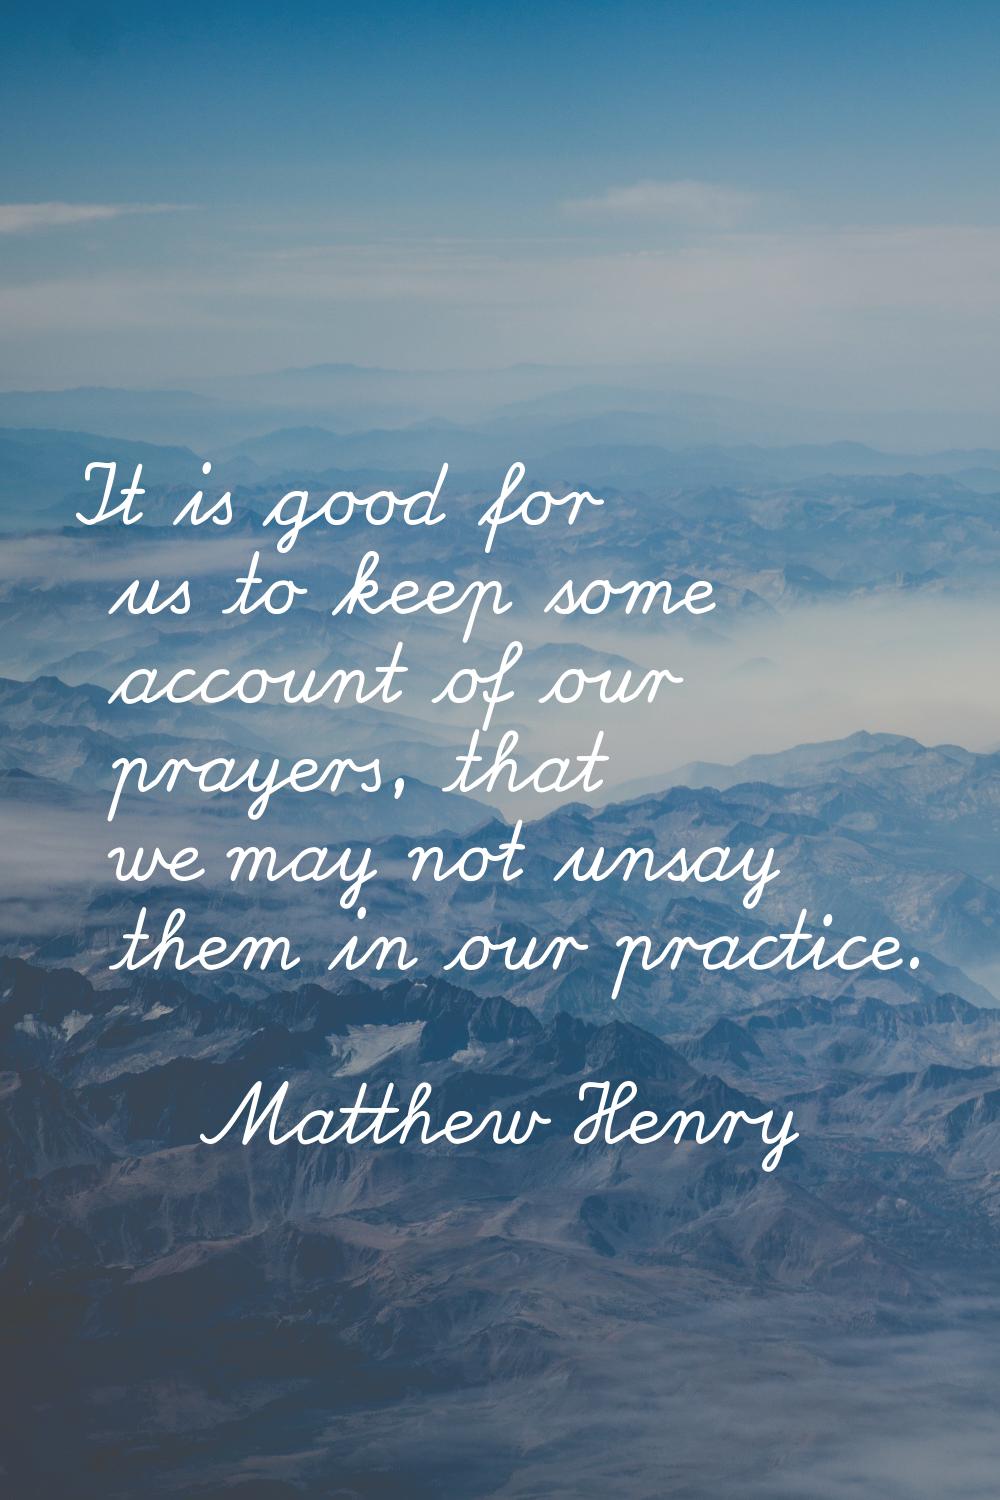 It is good for us to keep some account of our prayers, that we may not unsay them in our practice.